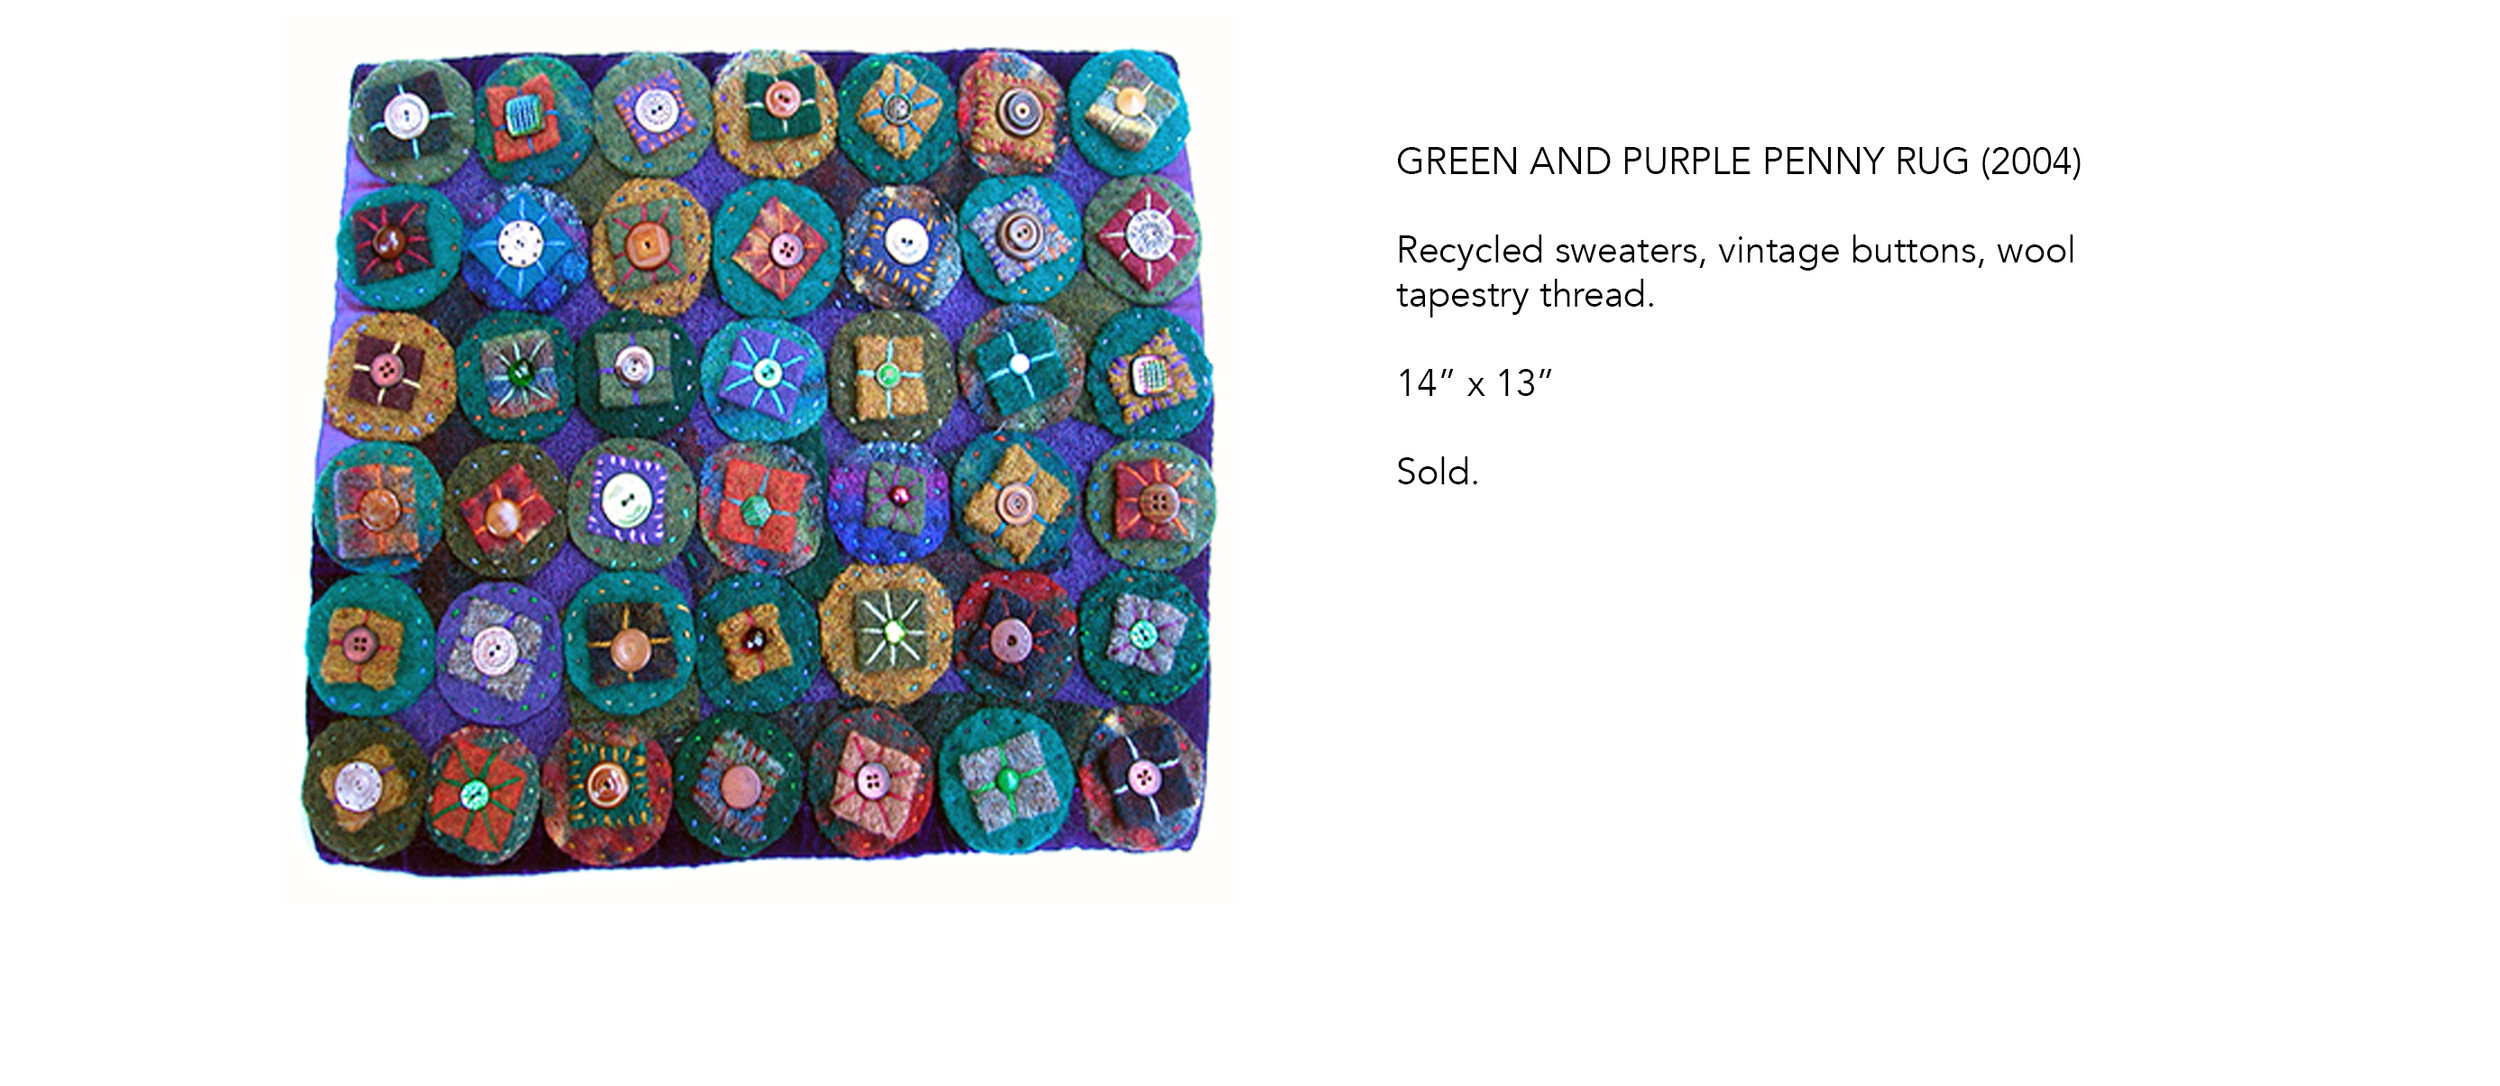 green & purple penny rug with text.jpg